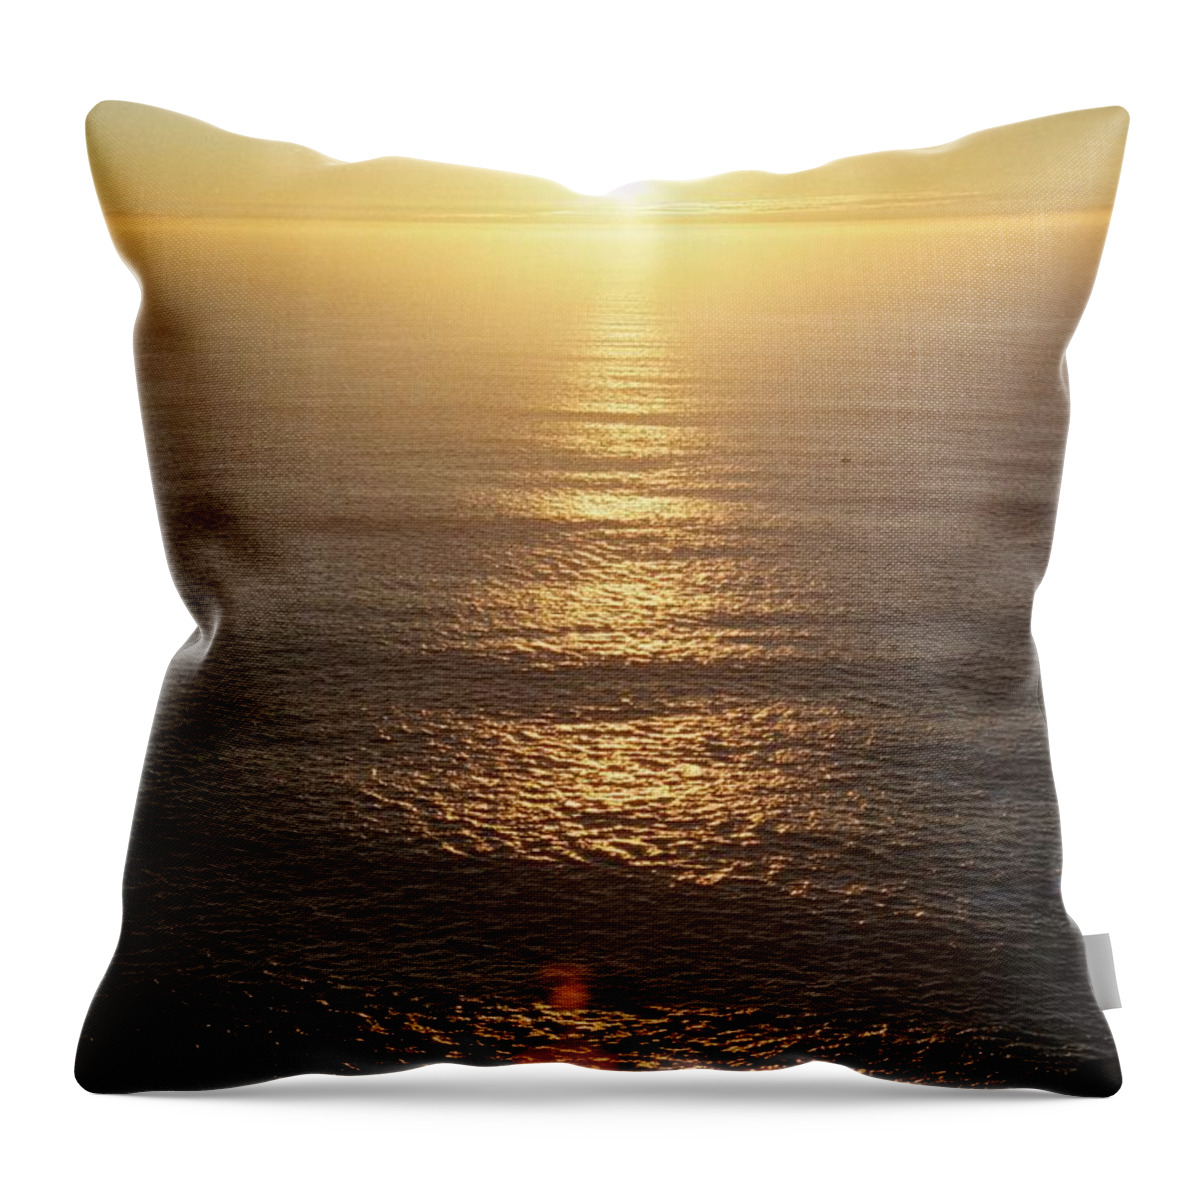 Bright Throw Pillow featuring the photograph Sunset by Barthelemy de Mazenod